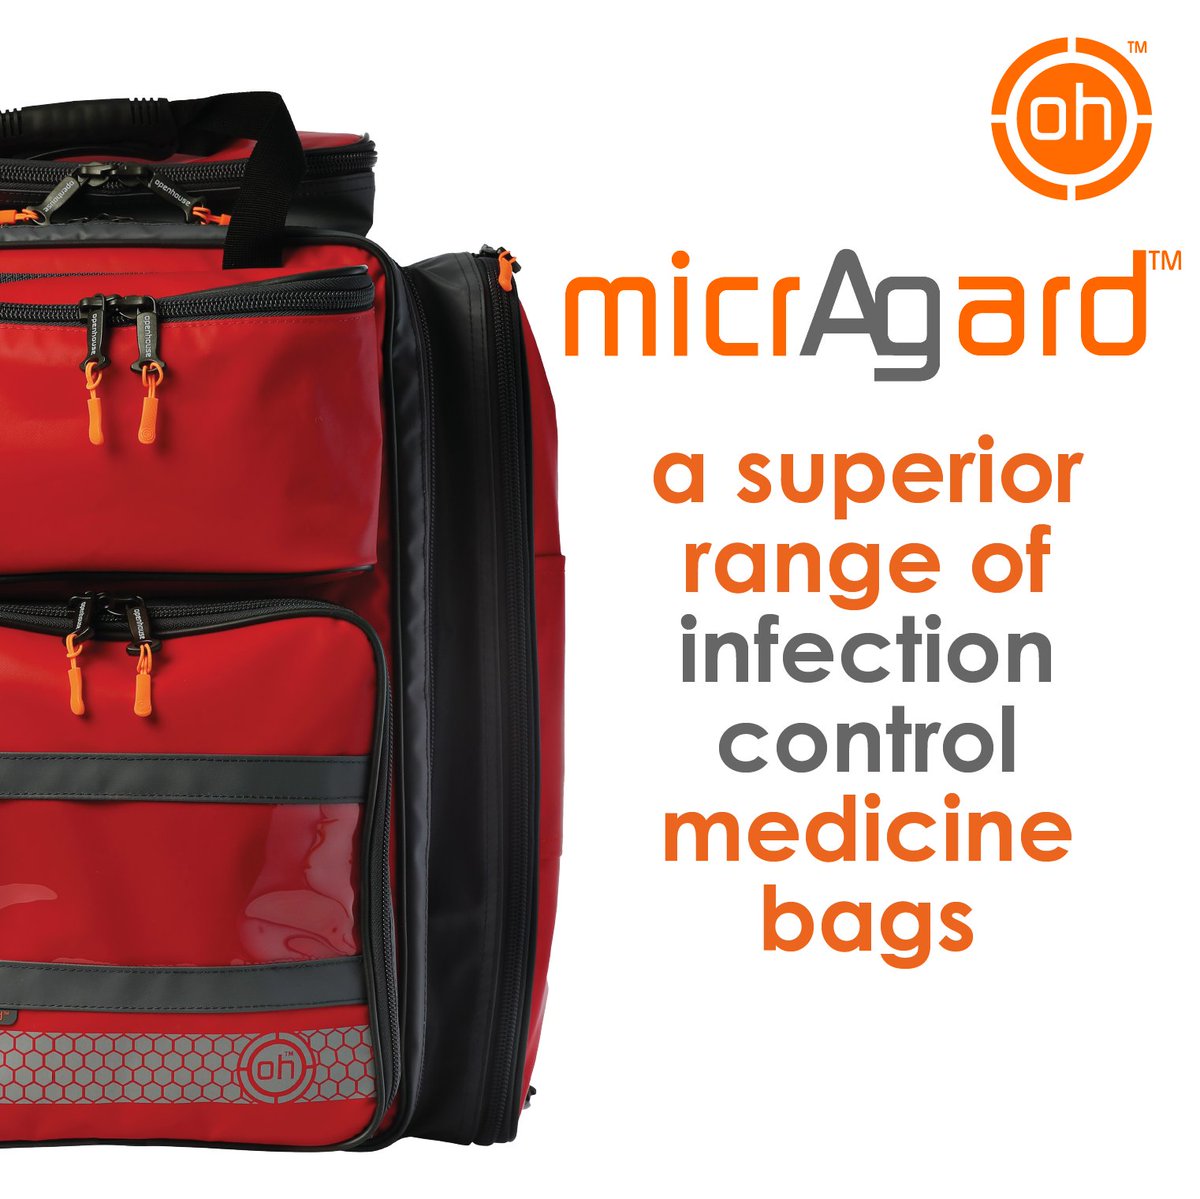 ⭐ Get to know micrAgard™ - our anti-bacterial, water repellent and flame retardant fabric! ⭐

Learn more at:

openhouseproducts.com/micragard/

#micrAgard #InfectionControl #MedicalBags